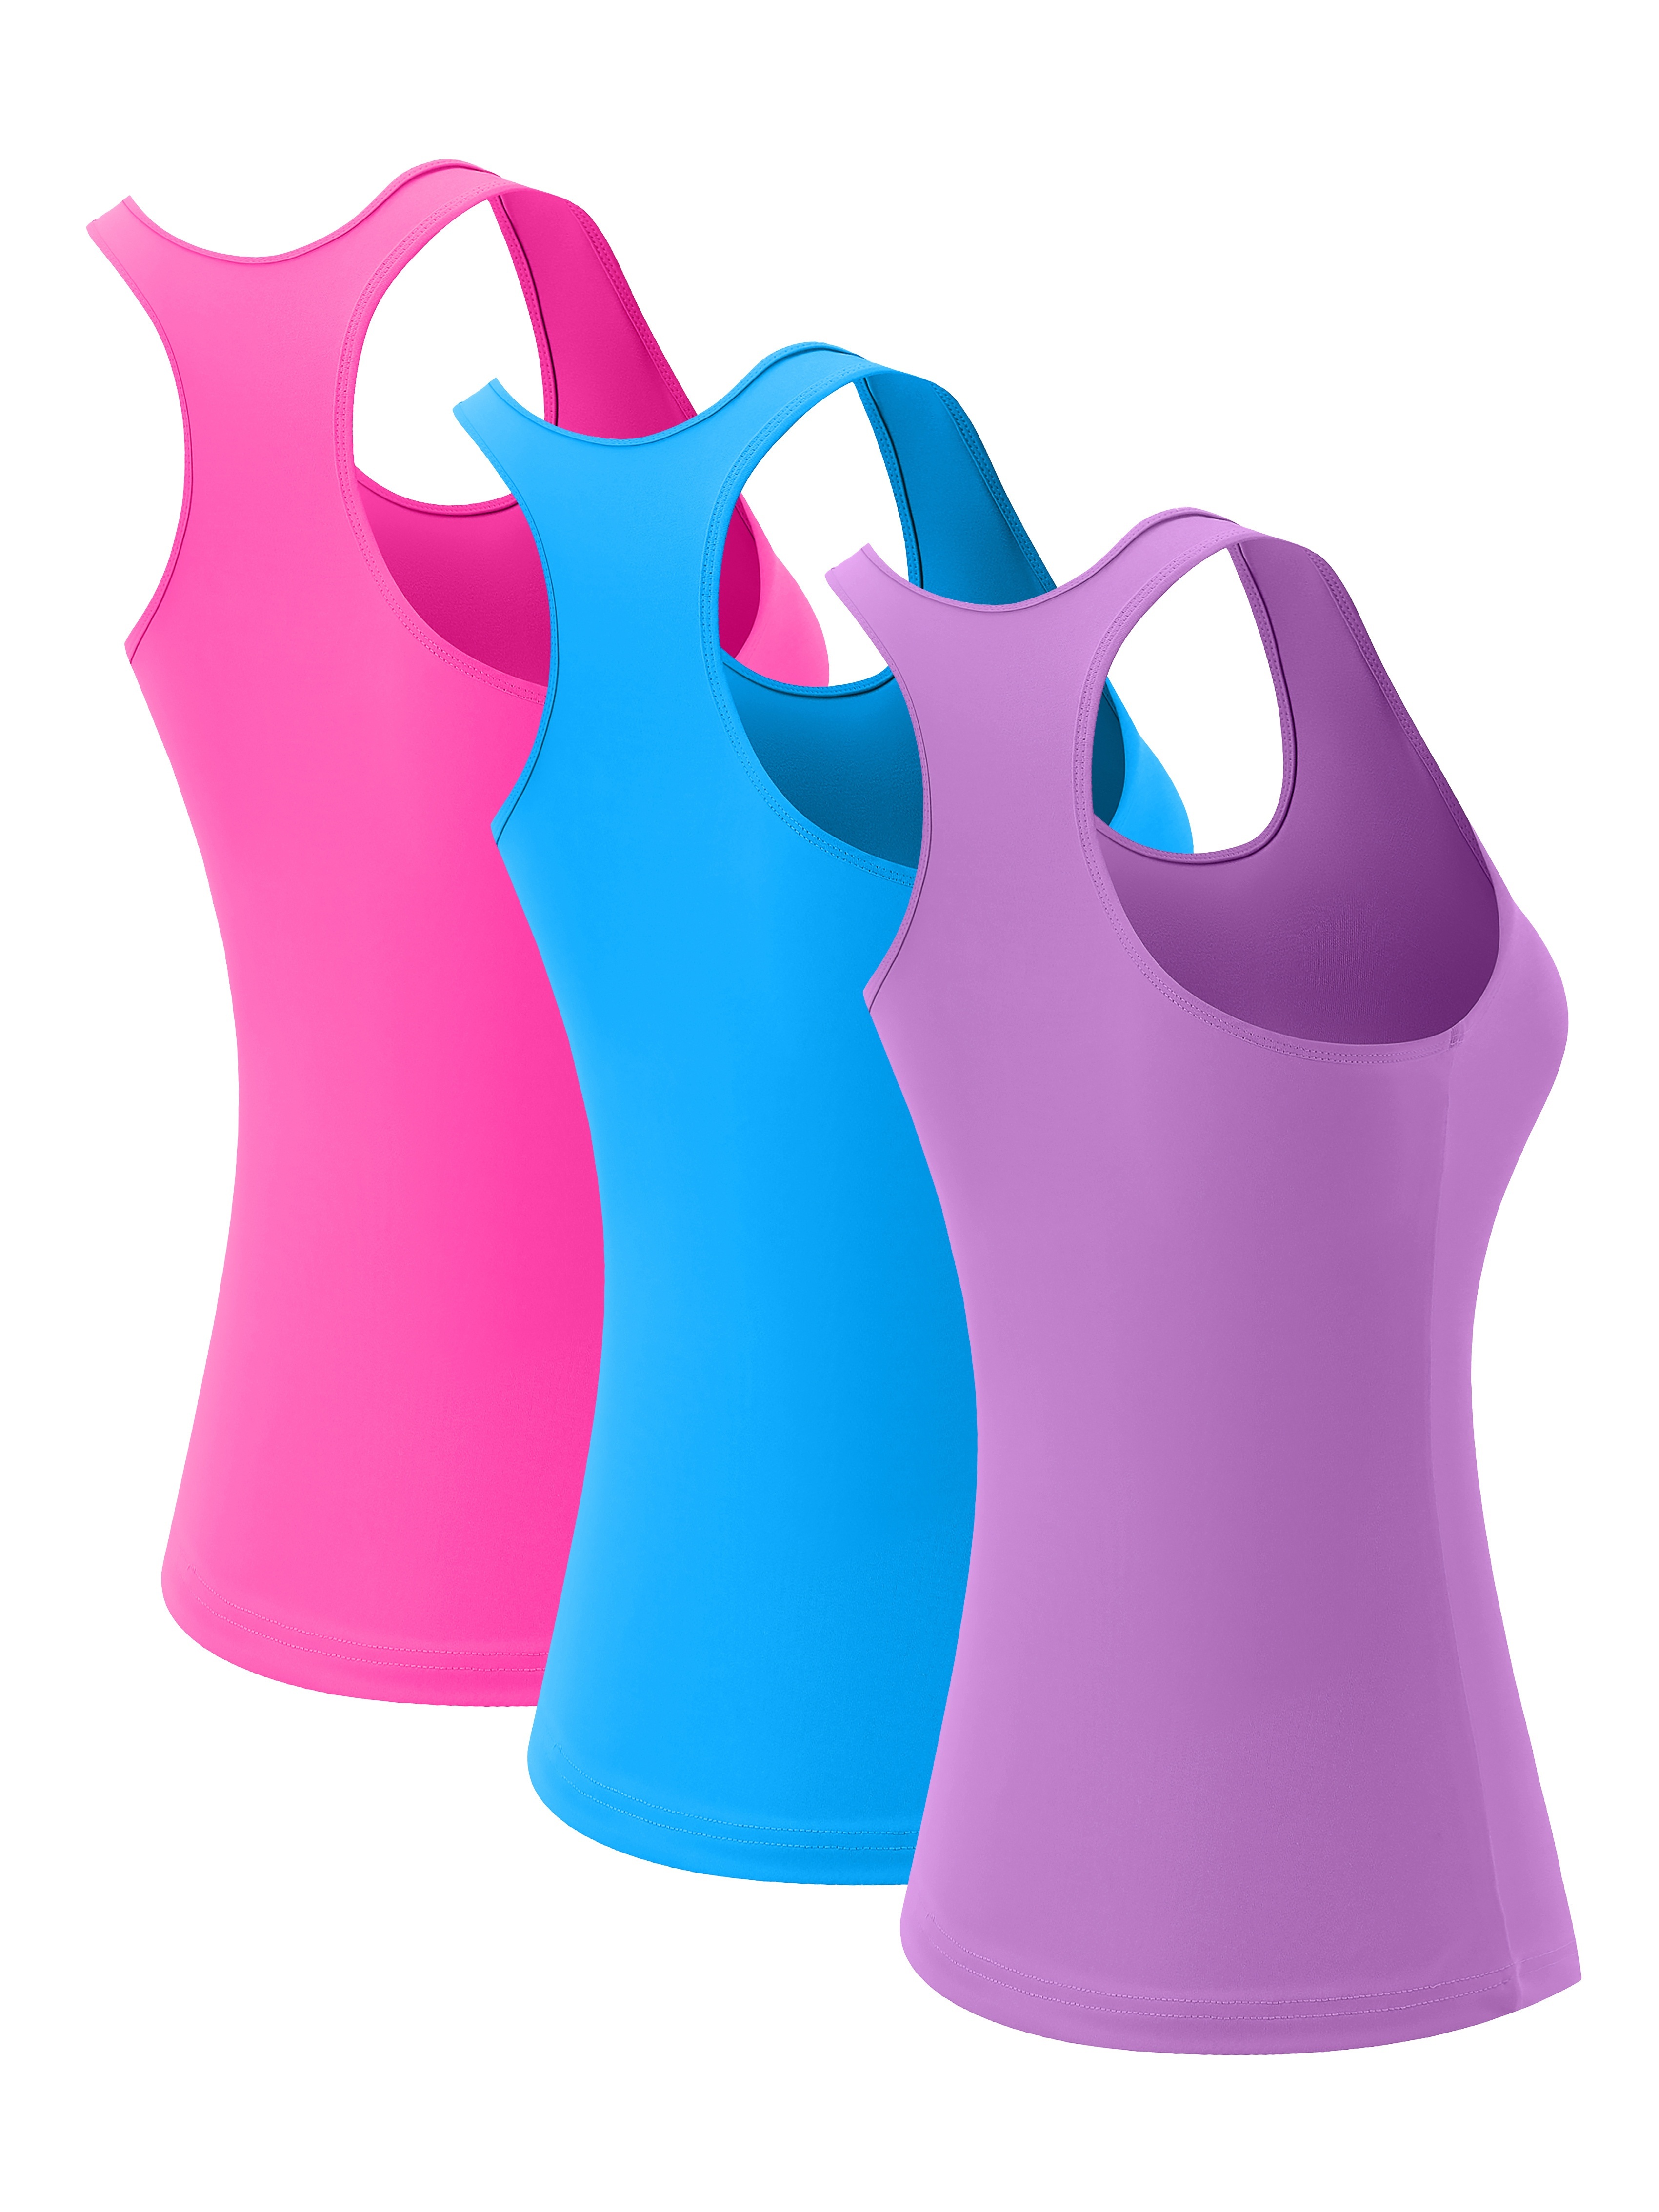 5 Pack Workout Tank Tops For Women, Athletic Racerback Sports Tank Tops,  Compression Sleeveless Shirts, Women's Activewear(Order One Size Up)